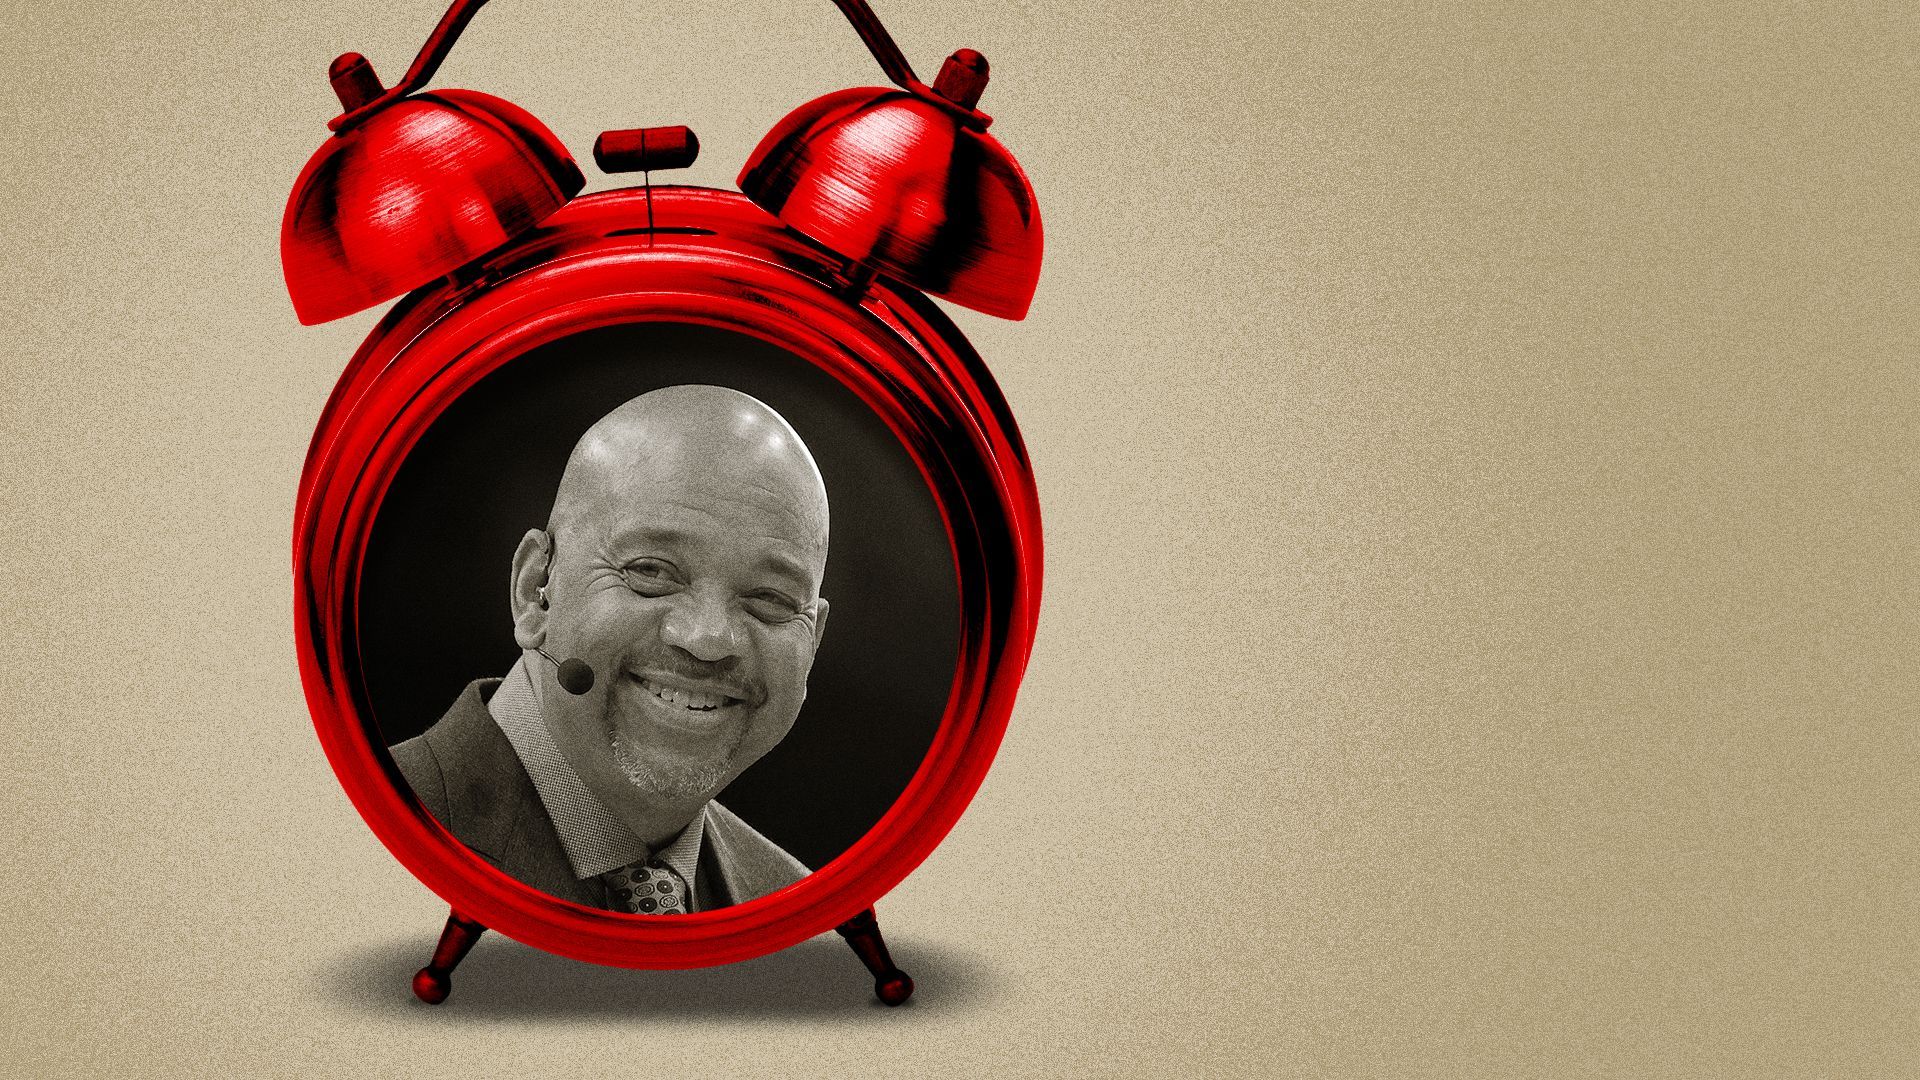 Photo illustration collage of Michael Wilbon inside a red alarm clock.